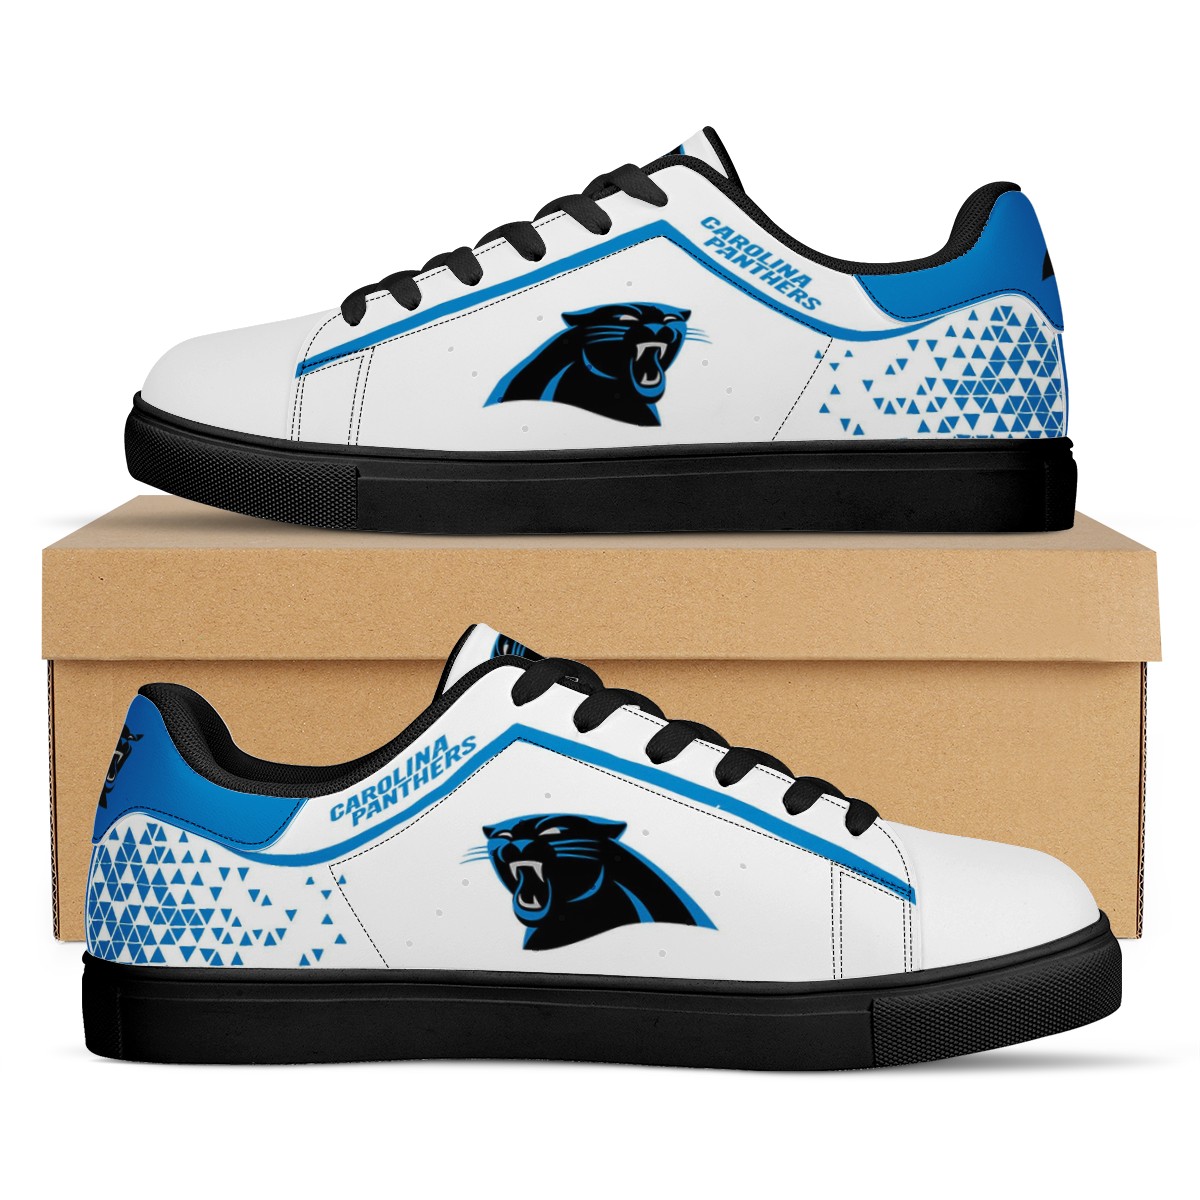 Women's Carolina Panthers Low Top Leather Sneakers 002